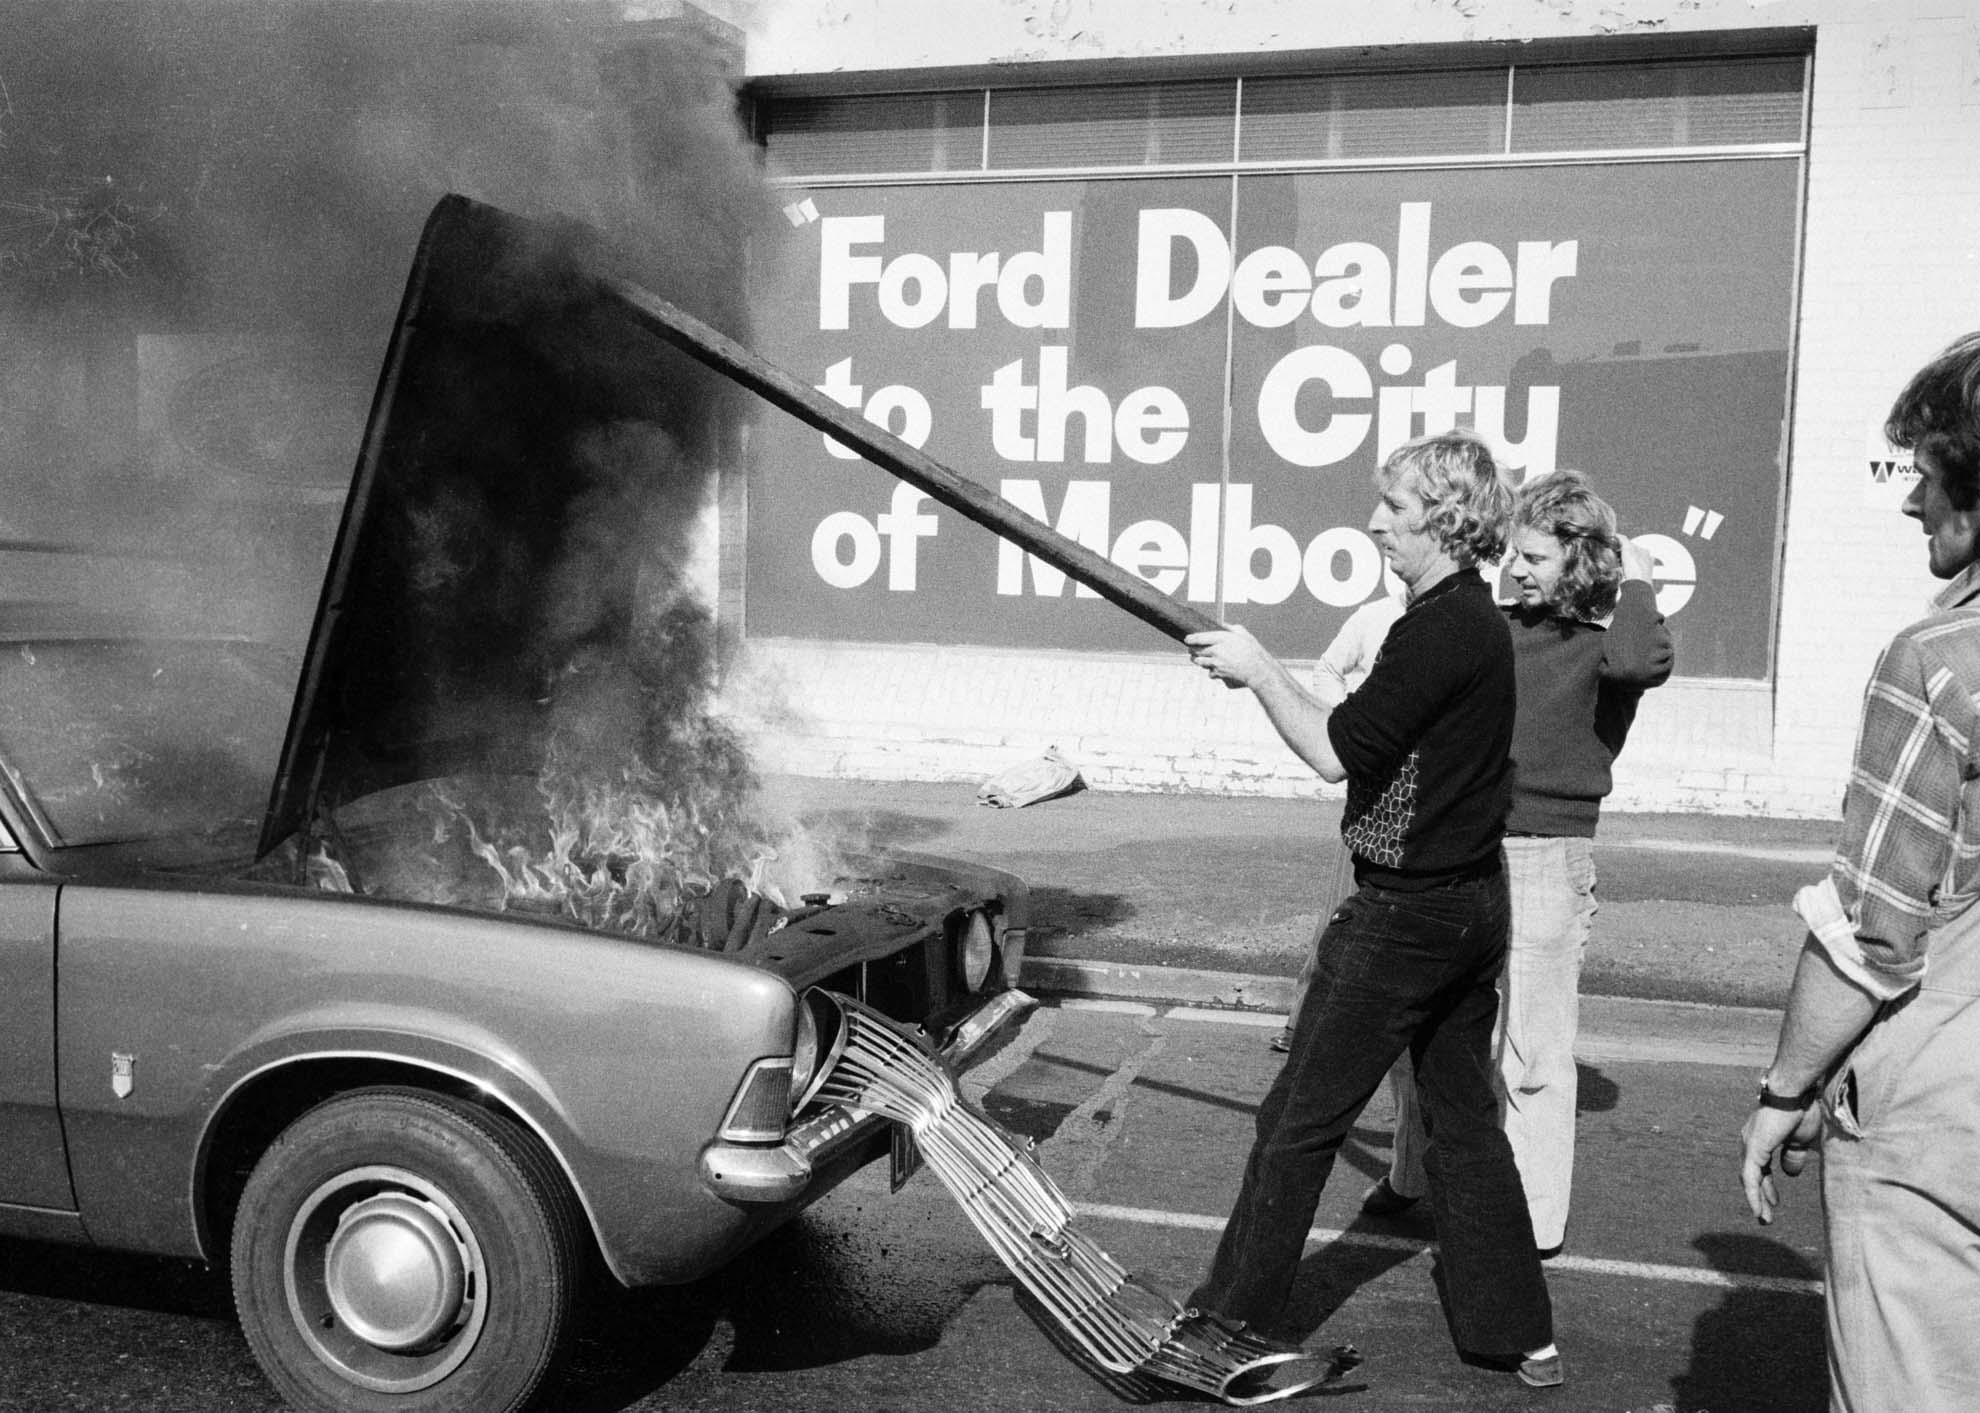 Ford Cortina on fire - City Collection